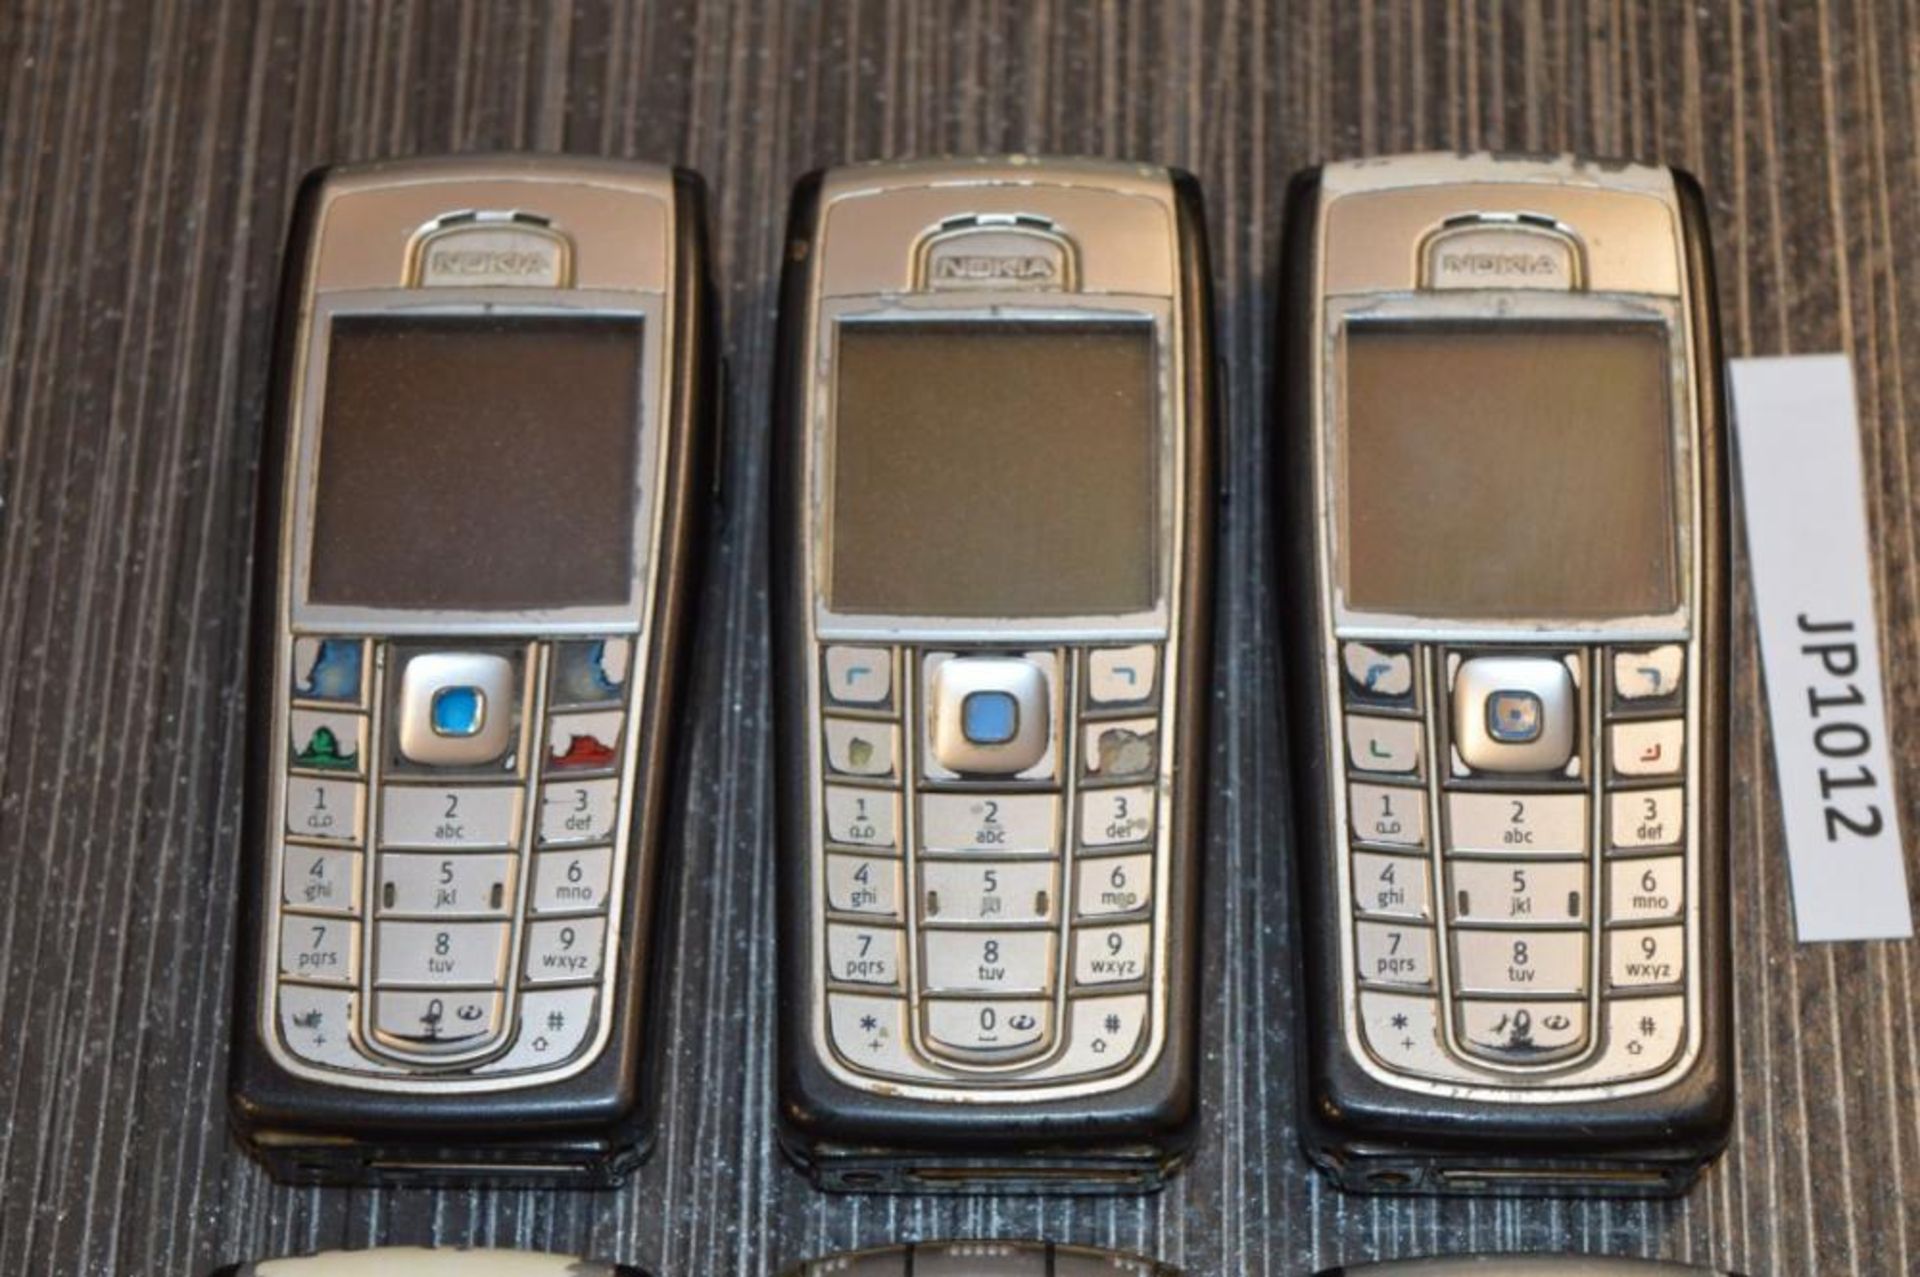 6 x Various NOKIA Mobile Phones - Removed From Company Closure - CL400 - Ref JP1012 - Location: - Image 3 of 3